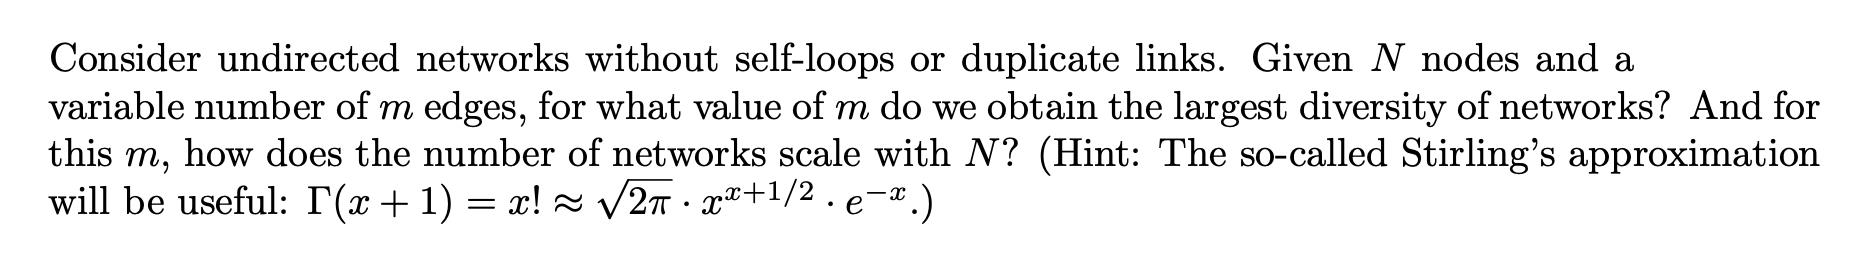 Consider undirected networks without self-loops or duplicate links. Given N nodes and a variable number of m